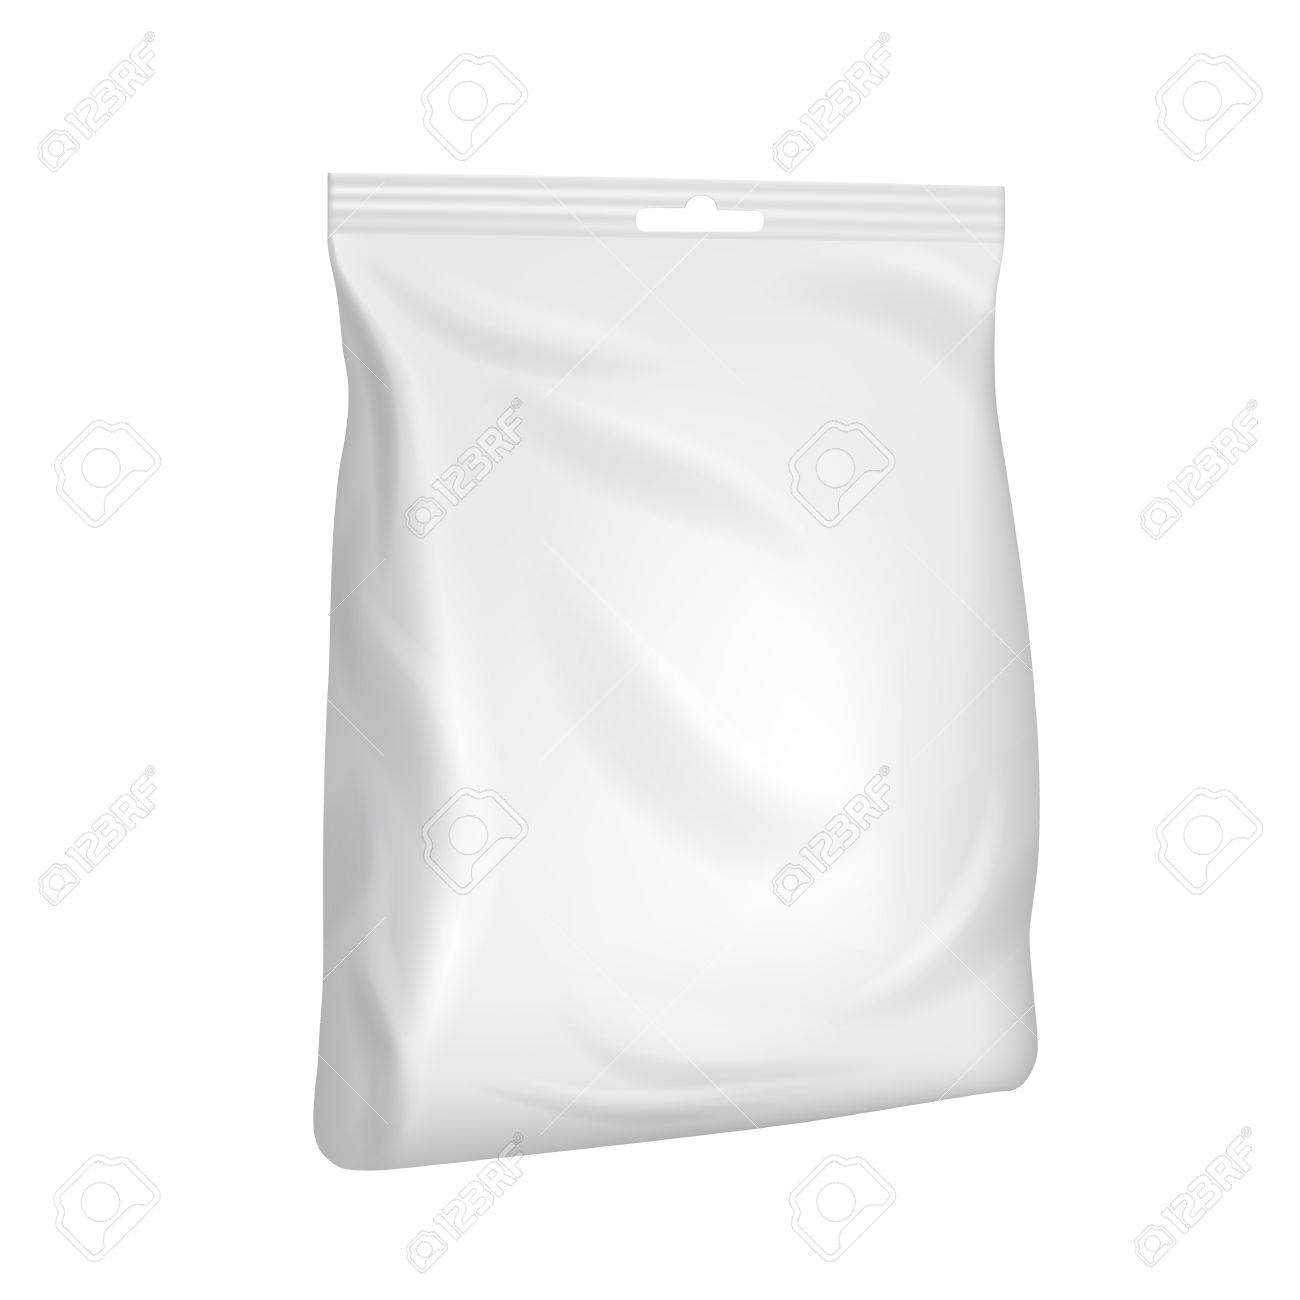 Blank Packaging Isolated On White Background. Foil Food Snack.. Regarding Blank Packaging Templates